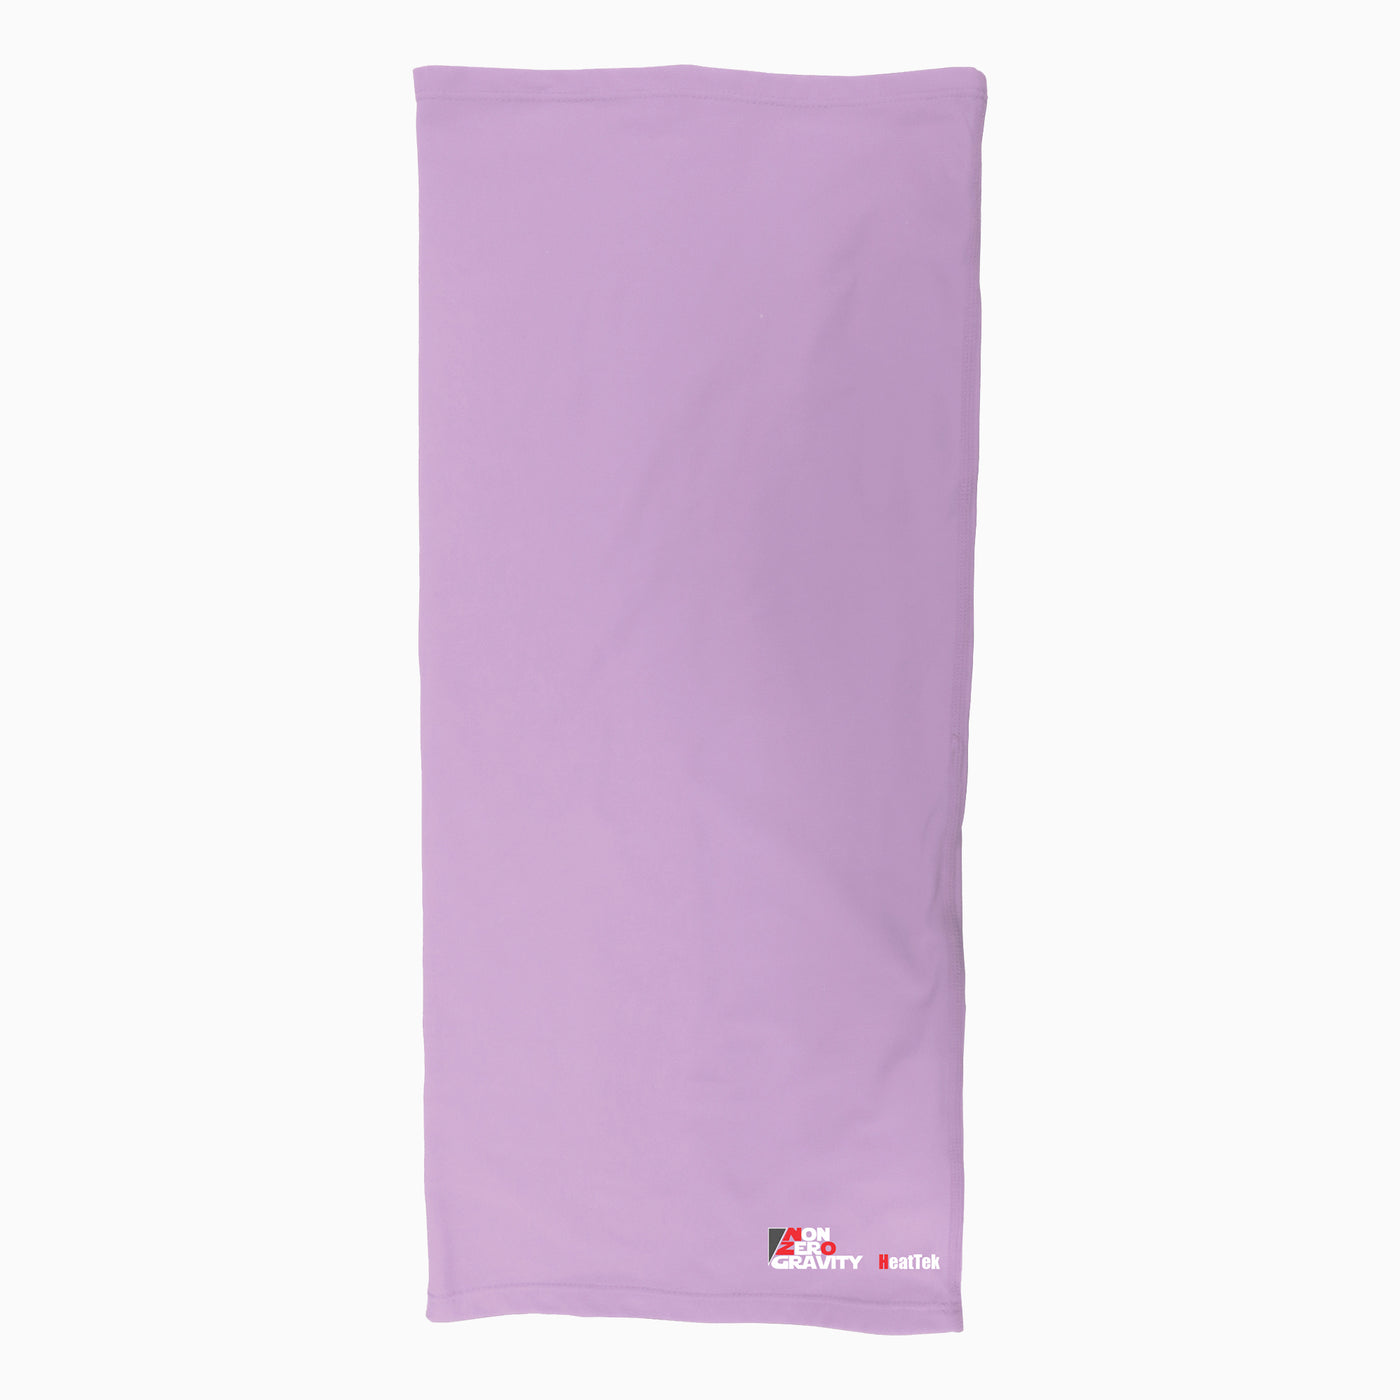 a lavender spandex neck gaiter to mask and protect your face